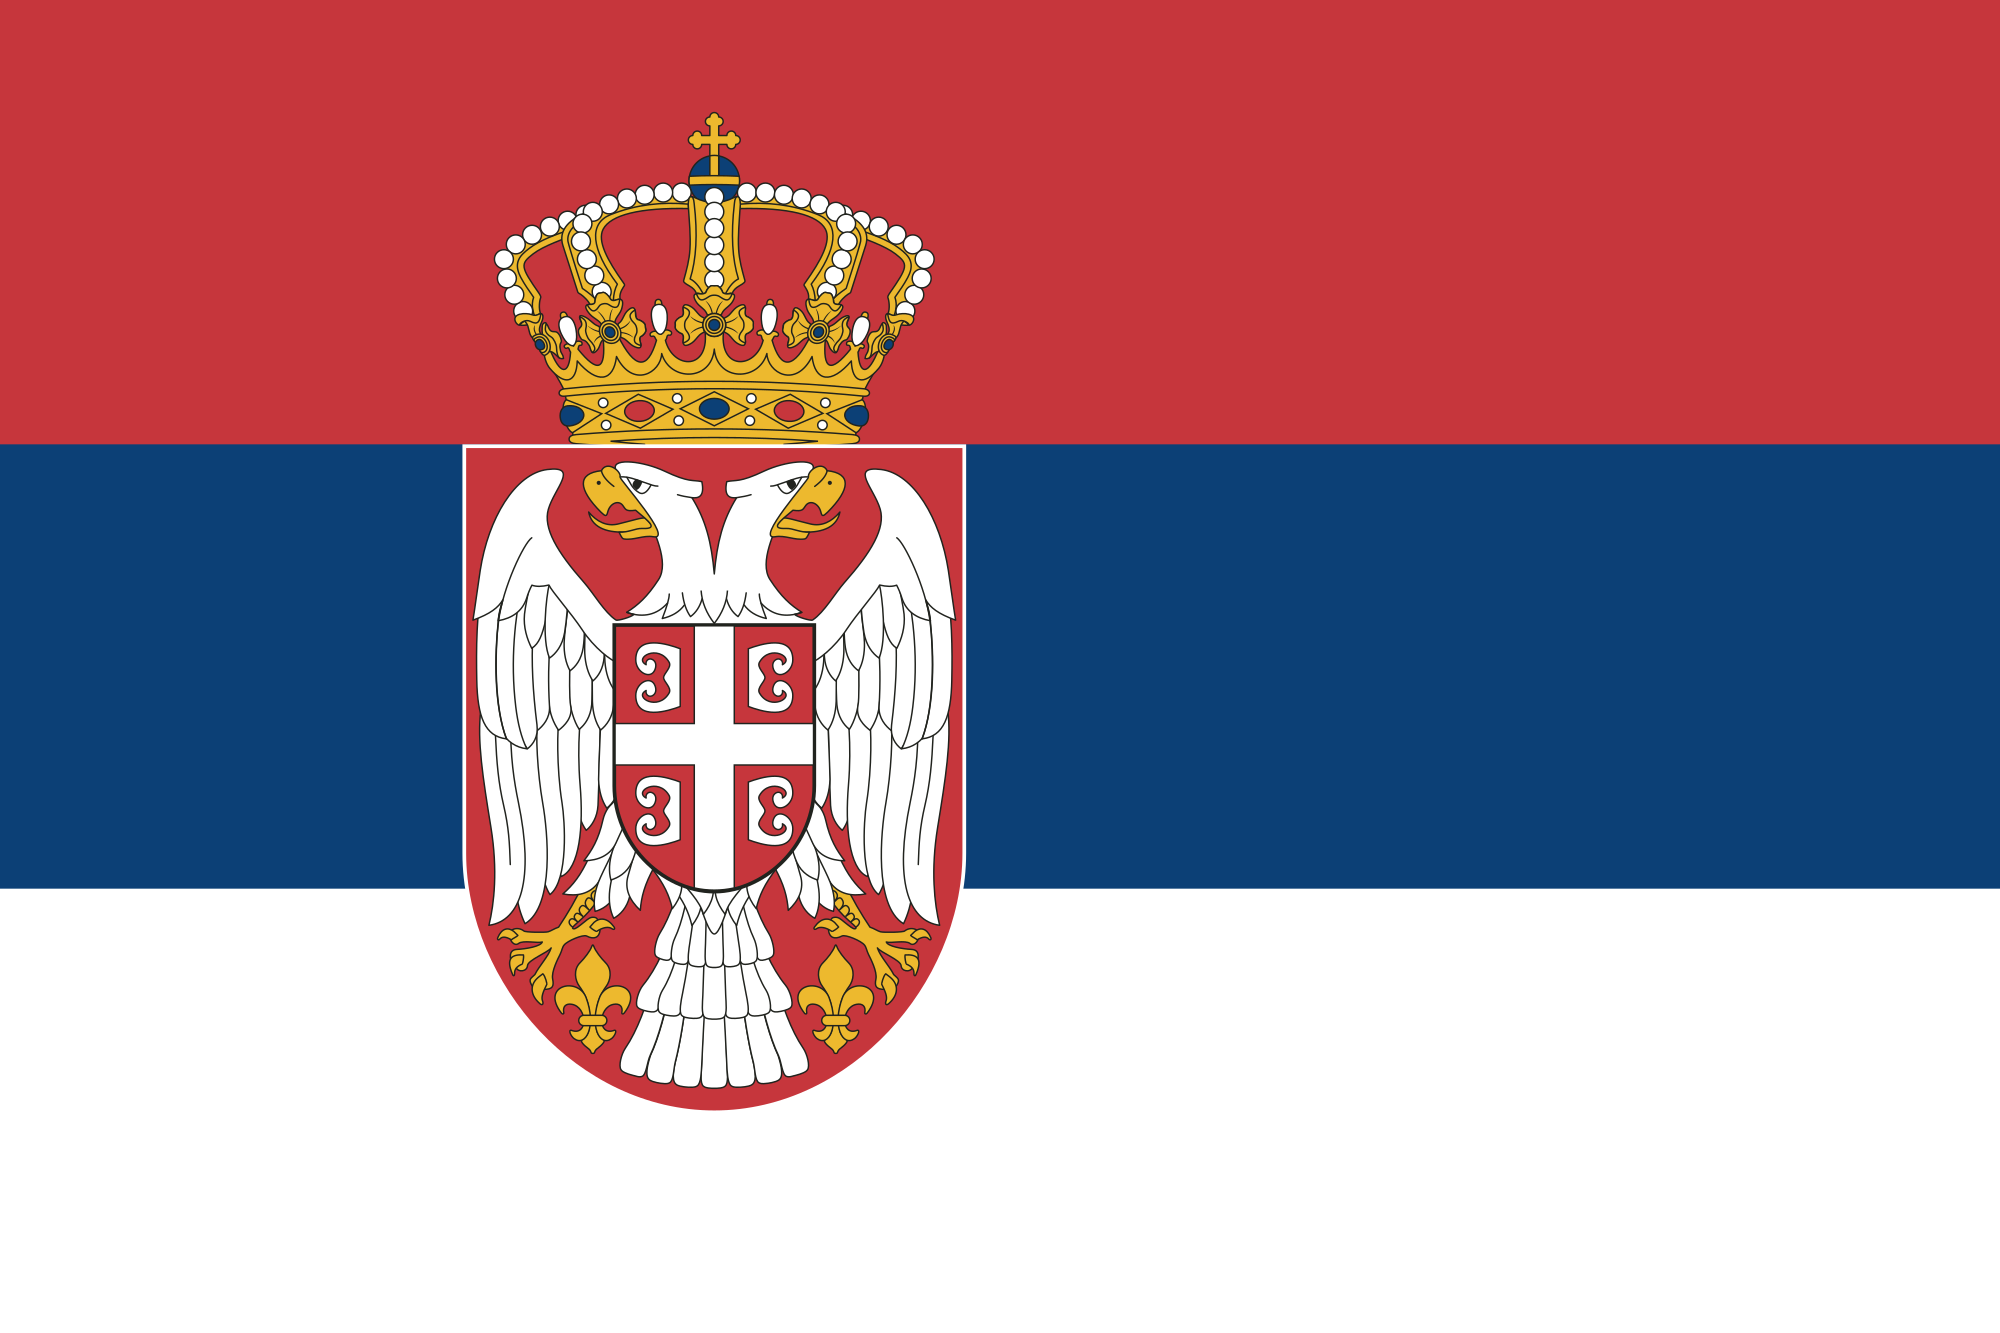 Image results for "serbia flag"